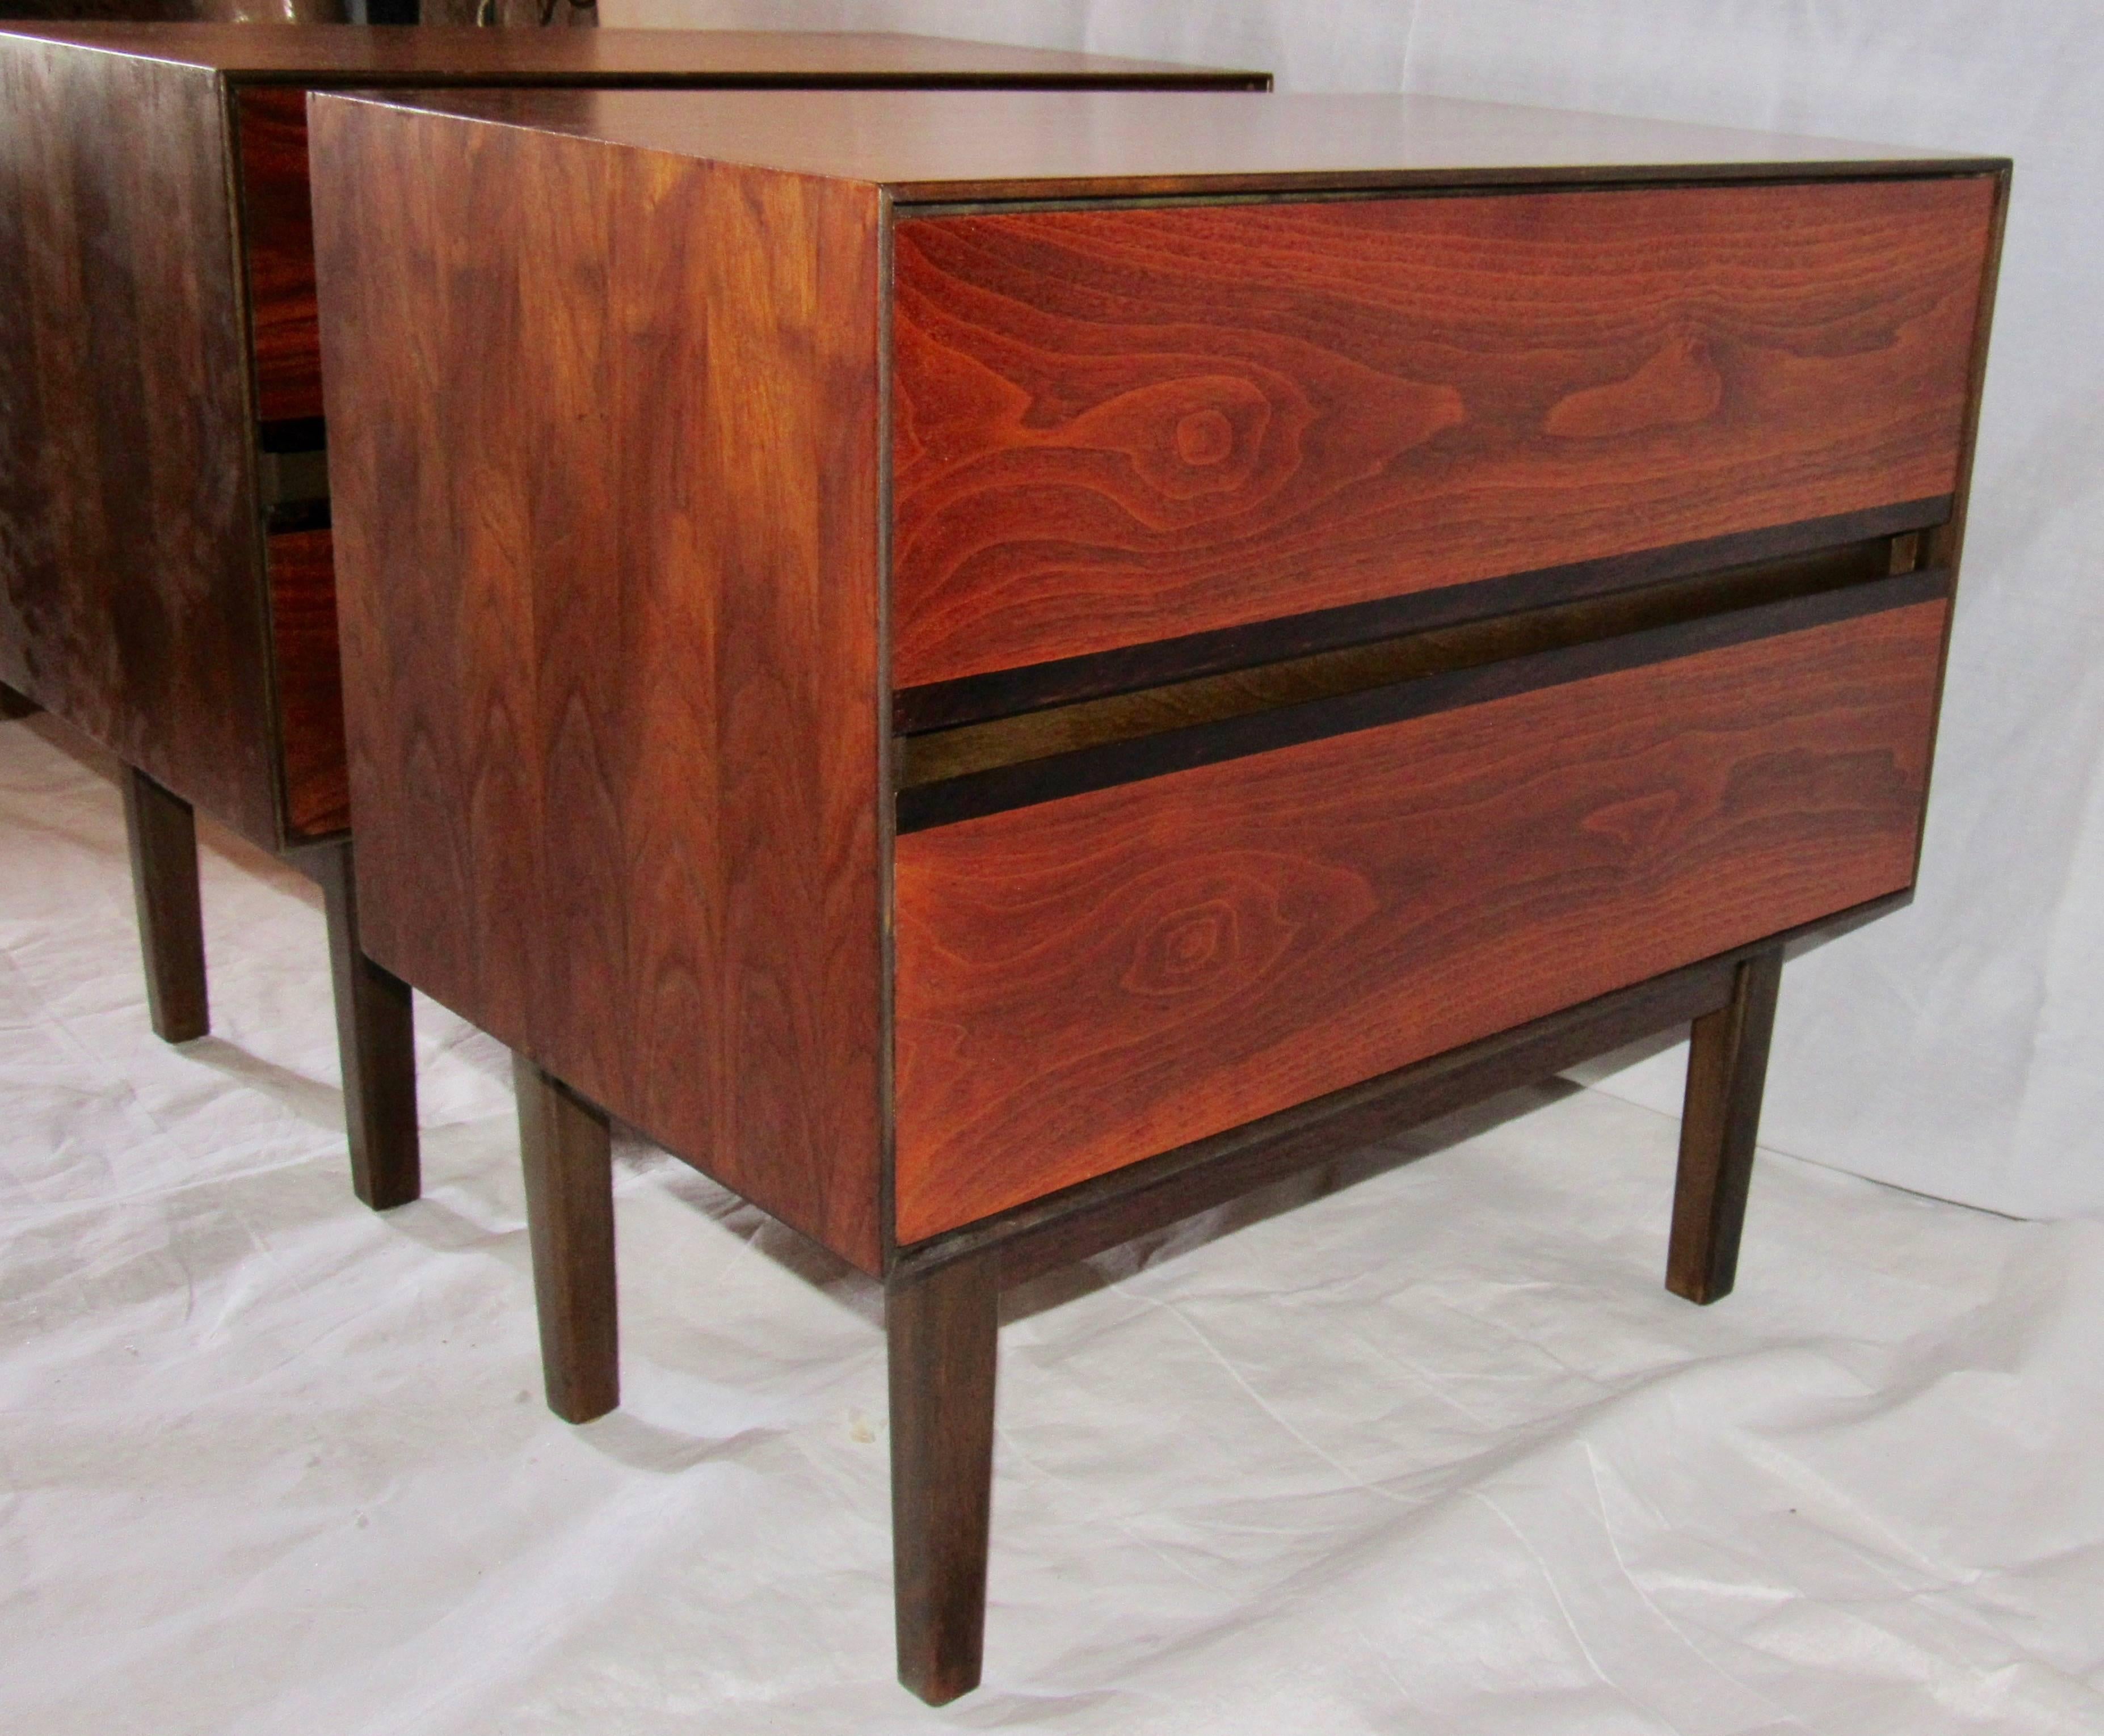 Midcentury pair of nightstands by H. Paul Browning for Stanley’s “Royal American” collection.
This elegant minimal design has two drawers in a walnut frame resting on a recessed four legged base of dark stained maple.
Each drawer has a slim band